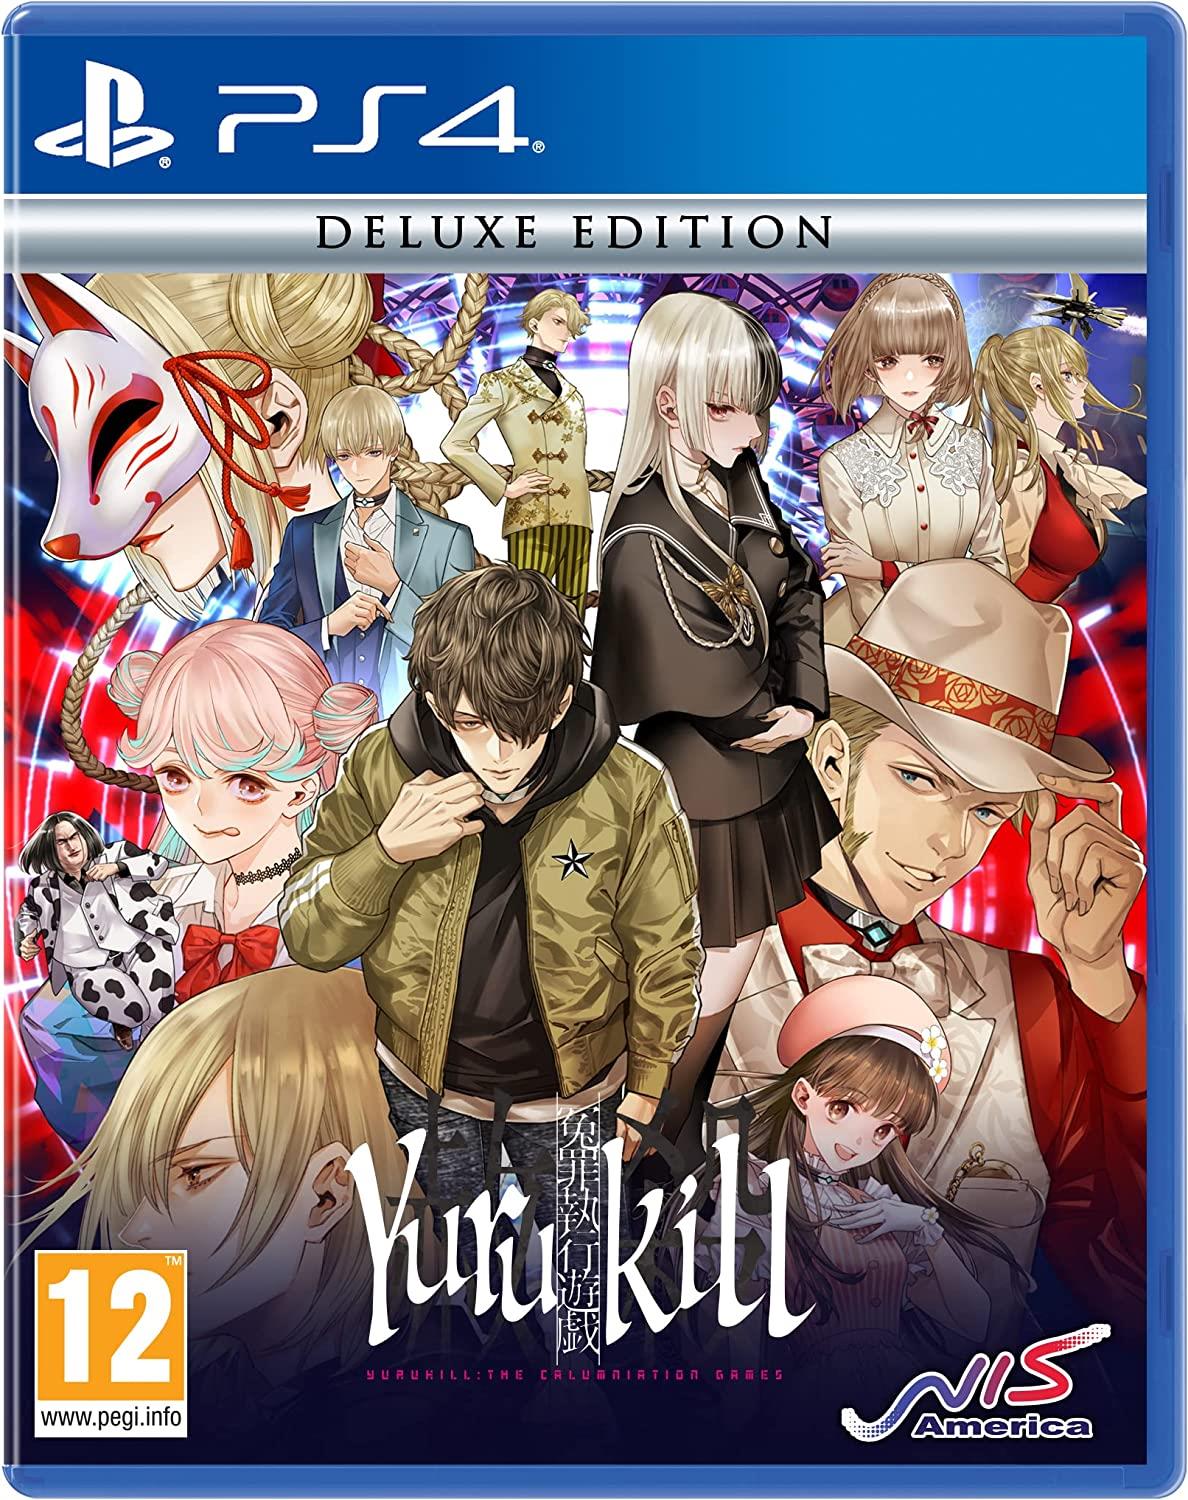 Yurukill: The Calumniation Games Deluxe Edition PS4 Game